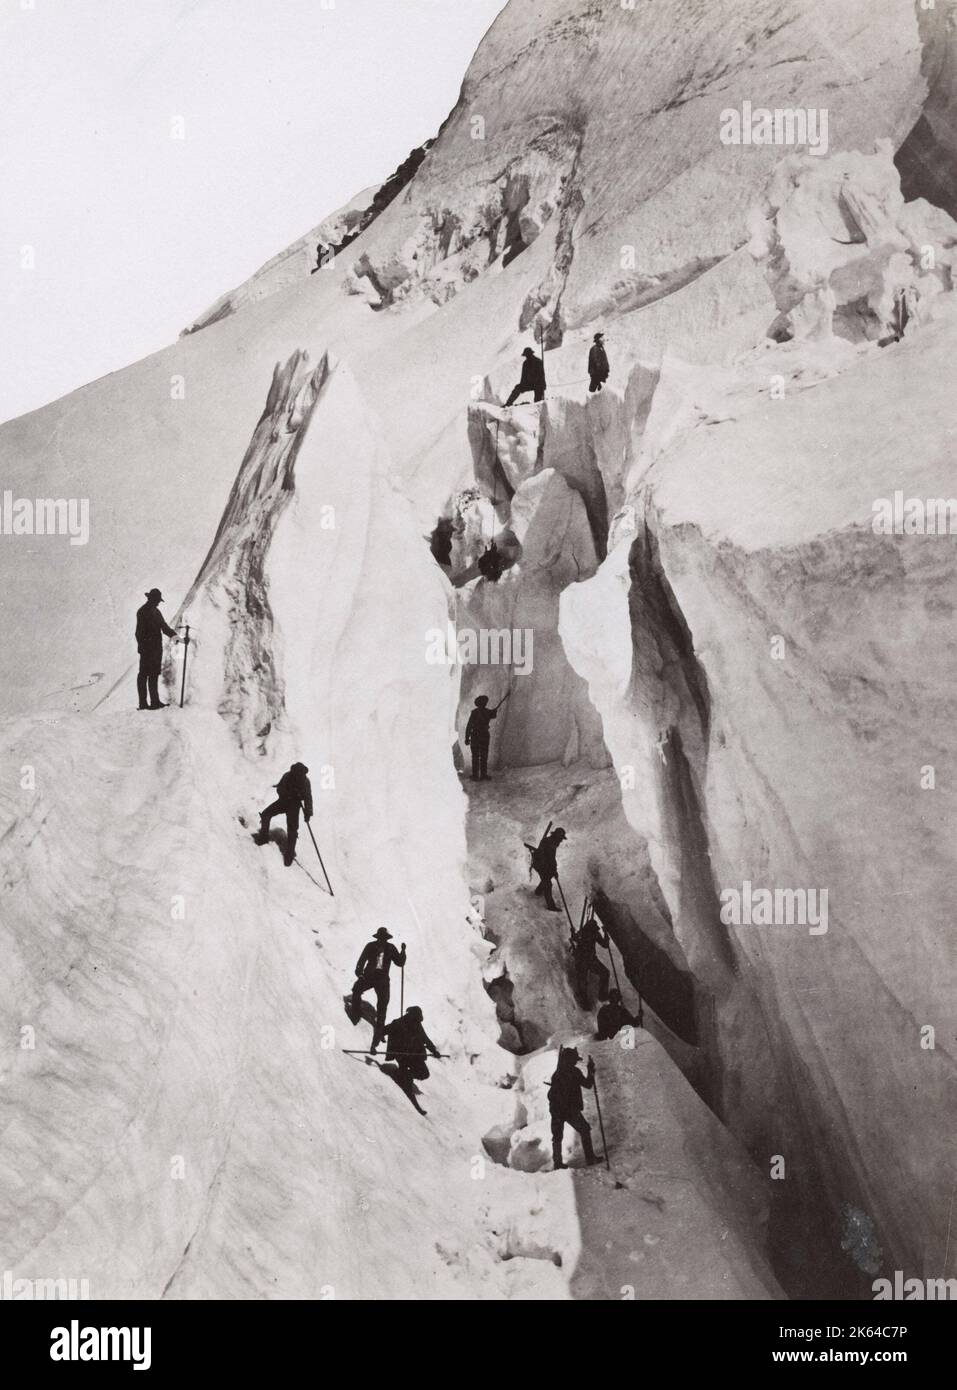 Late 19th century photograph - Climbing the the Alps, climbers roped. Stock Photo